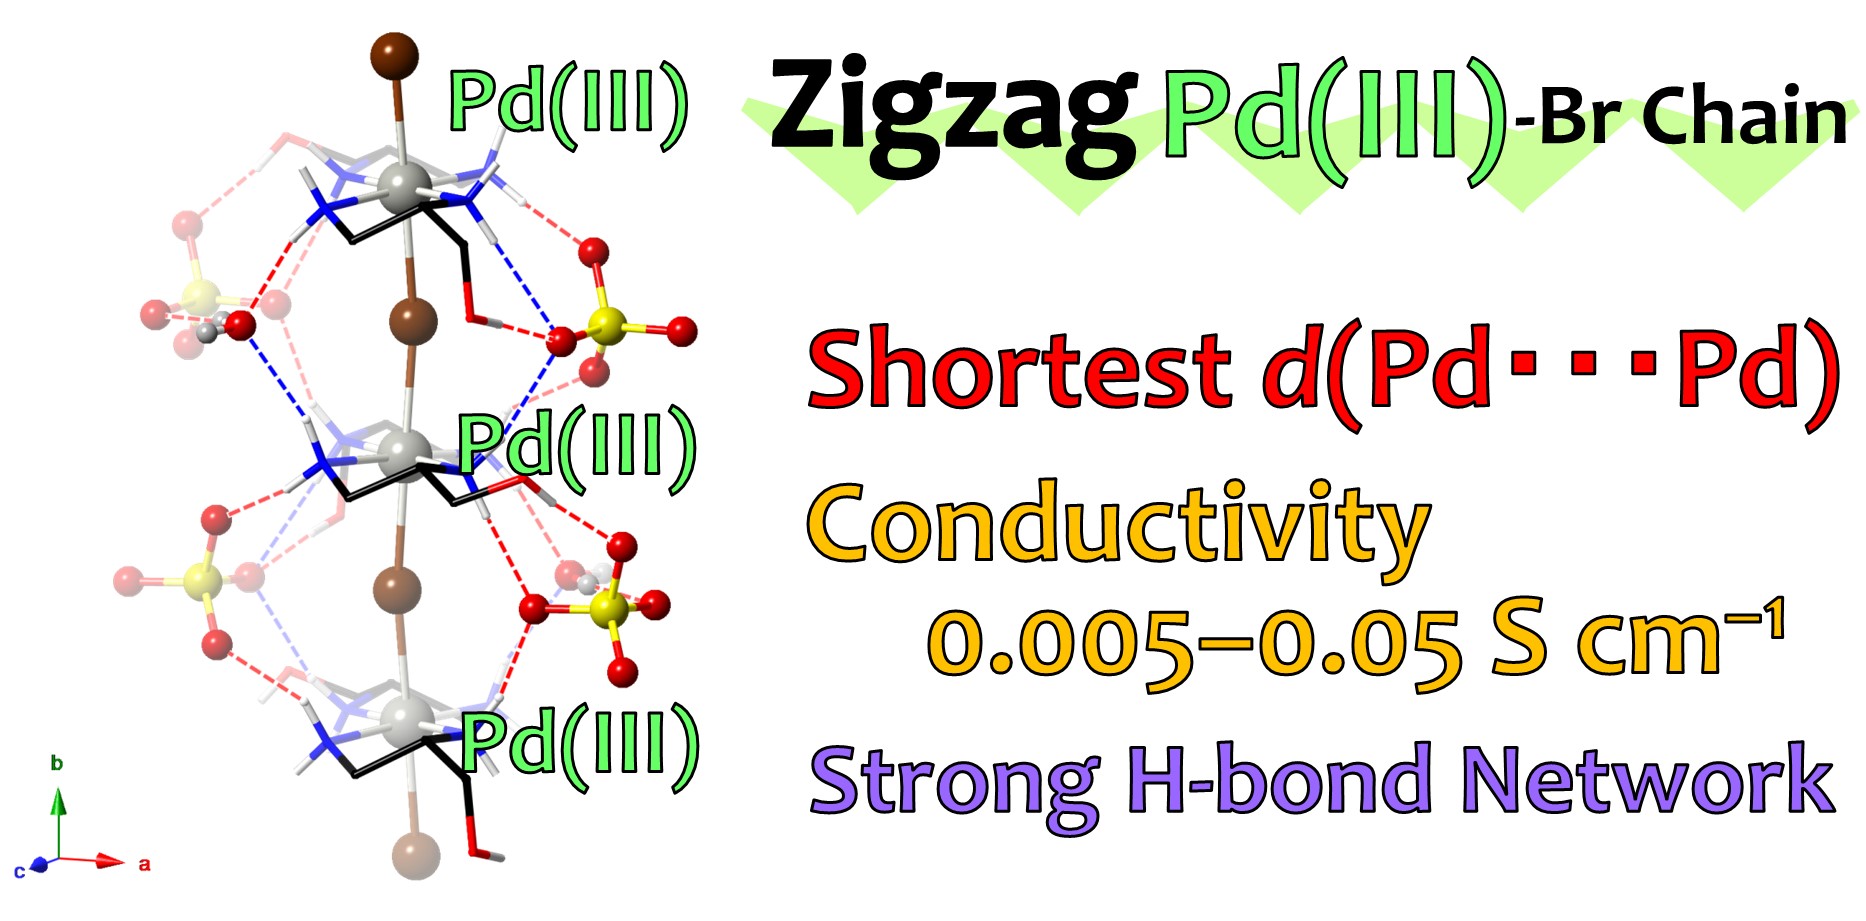 Table of Content of the Paper 'Conductive zigzag Pd(III)-Br chain complex realized by multiple-hydrogen-bond approach'.